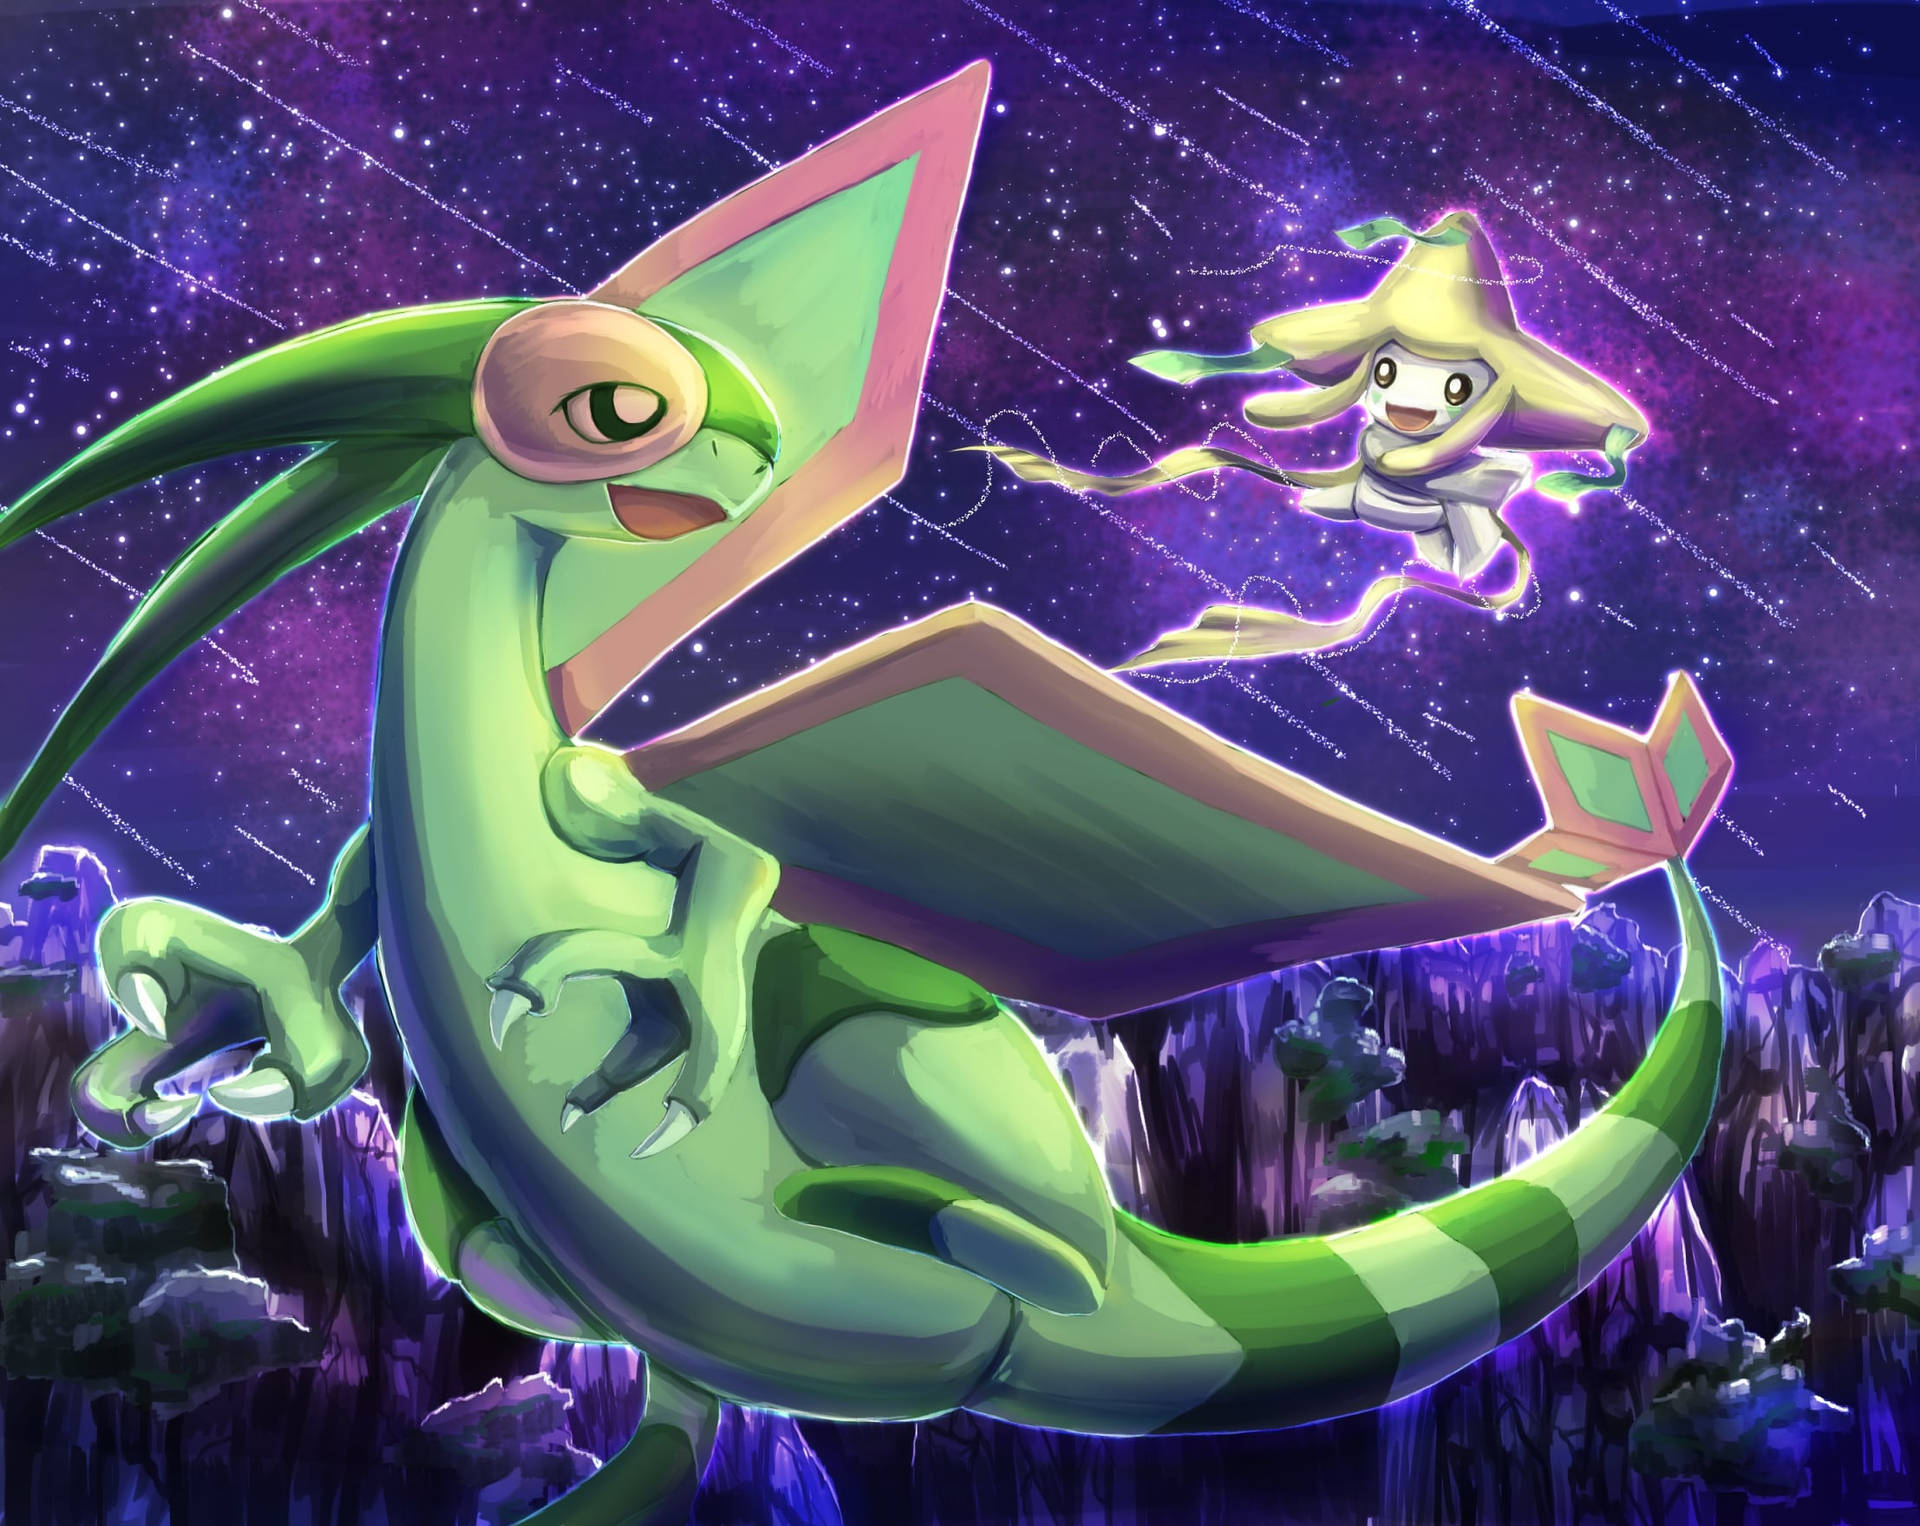 Legendary Encounter - Flygon and Jirachi in a Mesmerizing Standoff Wallpaper